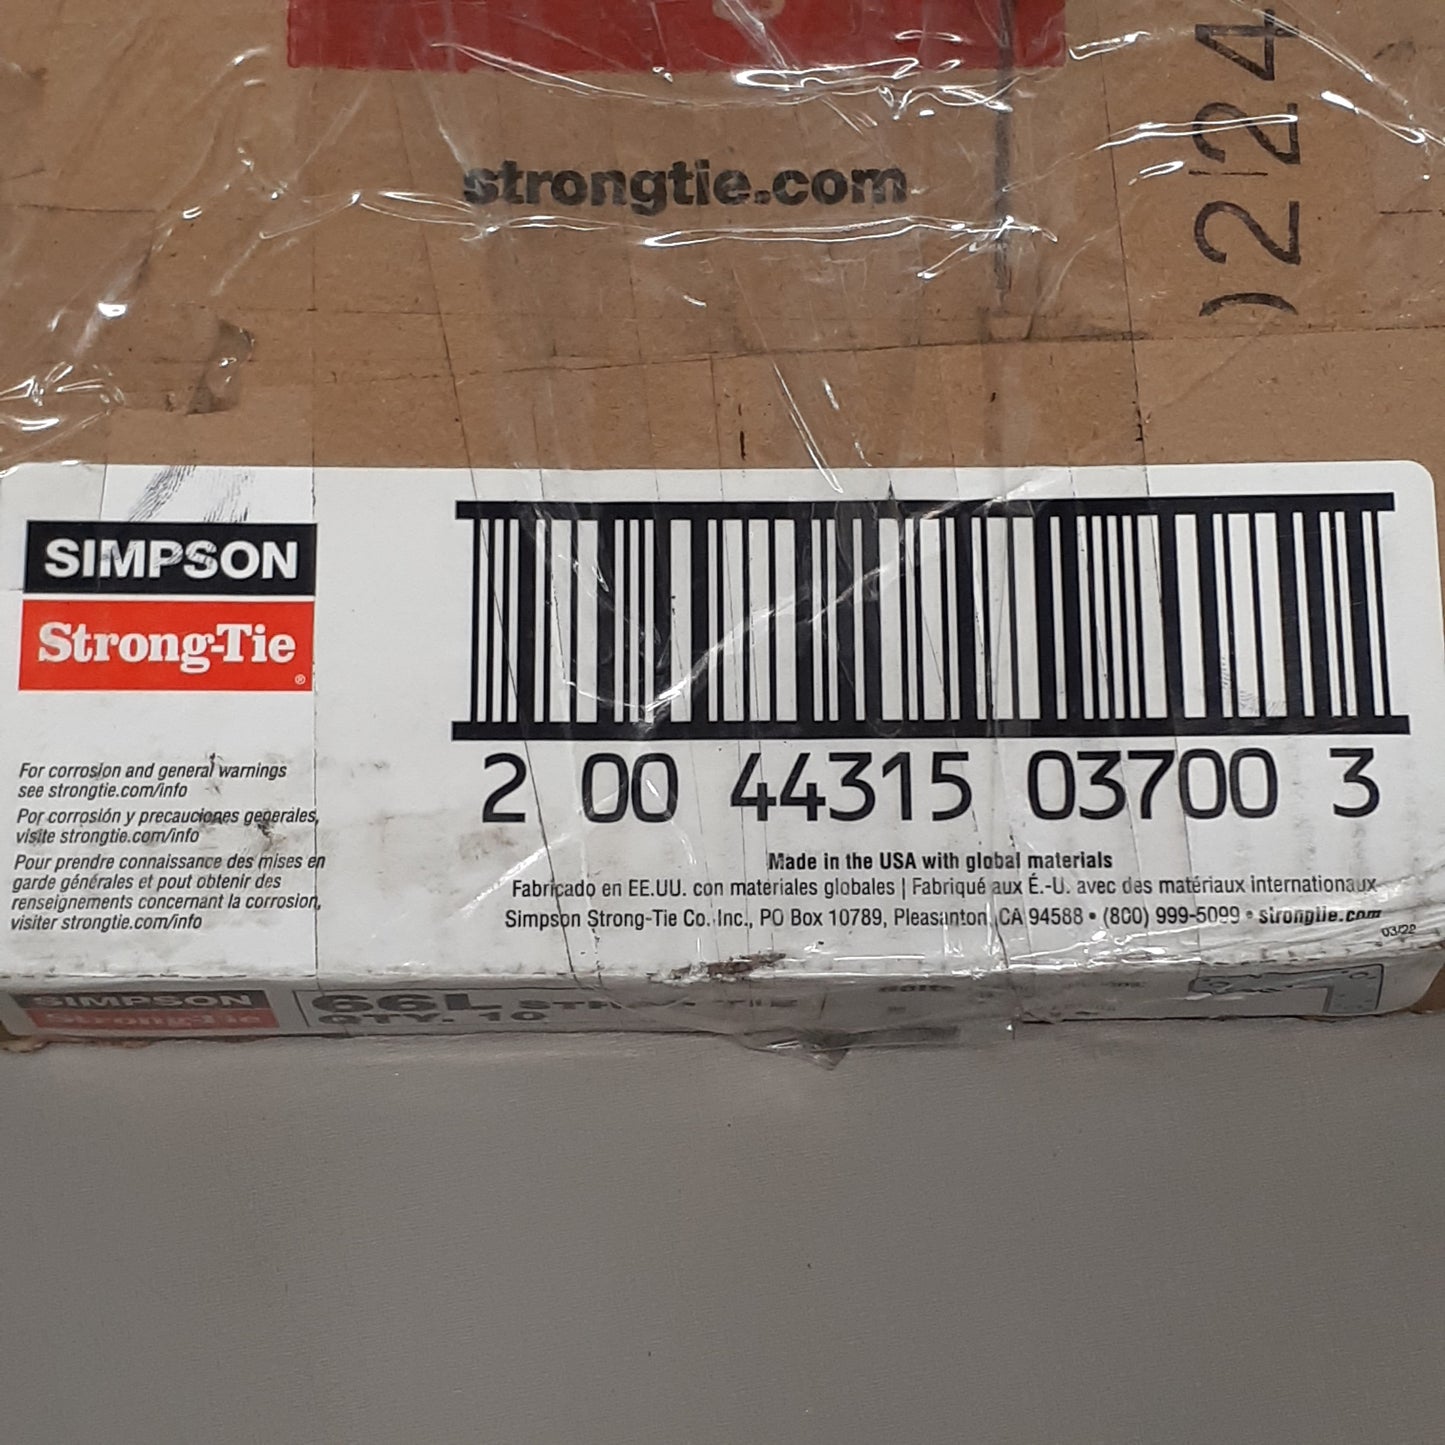 SIMPSON 10 PK of Strong-Tie Strap Tie 6" 66L (New)